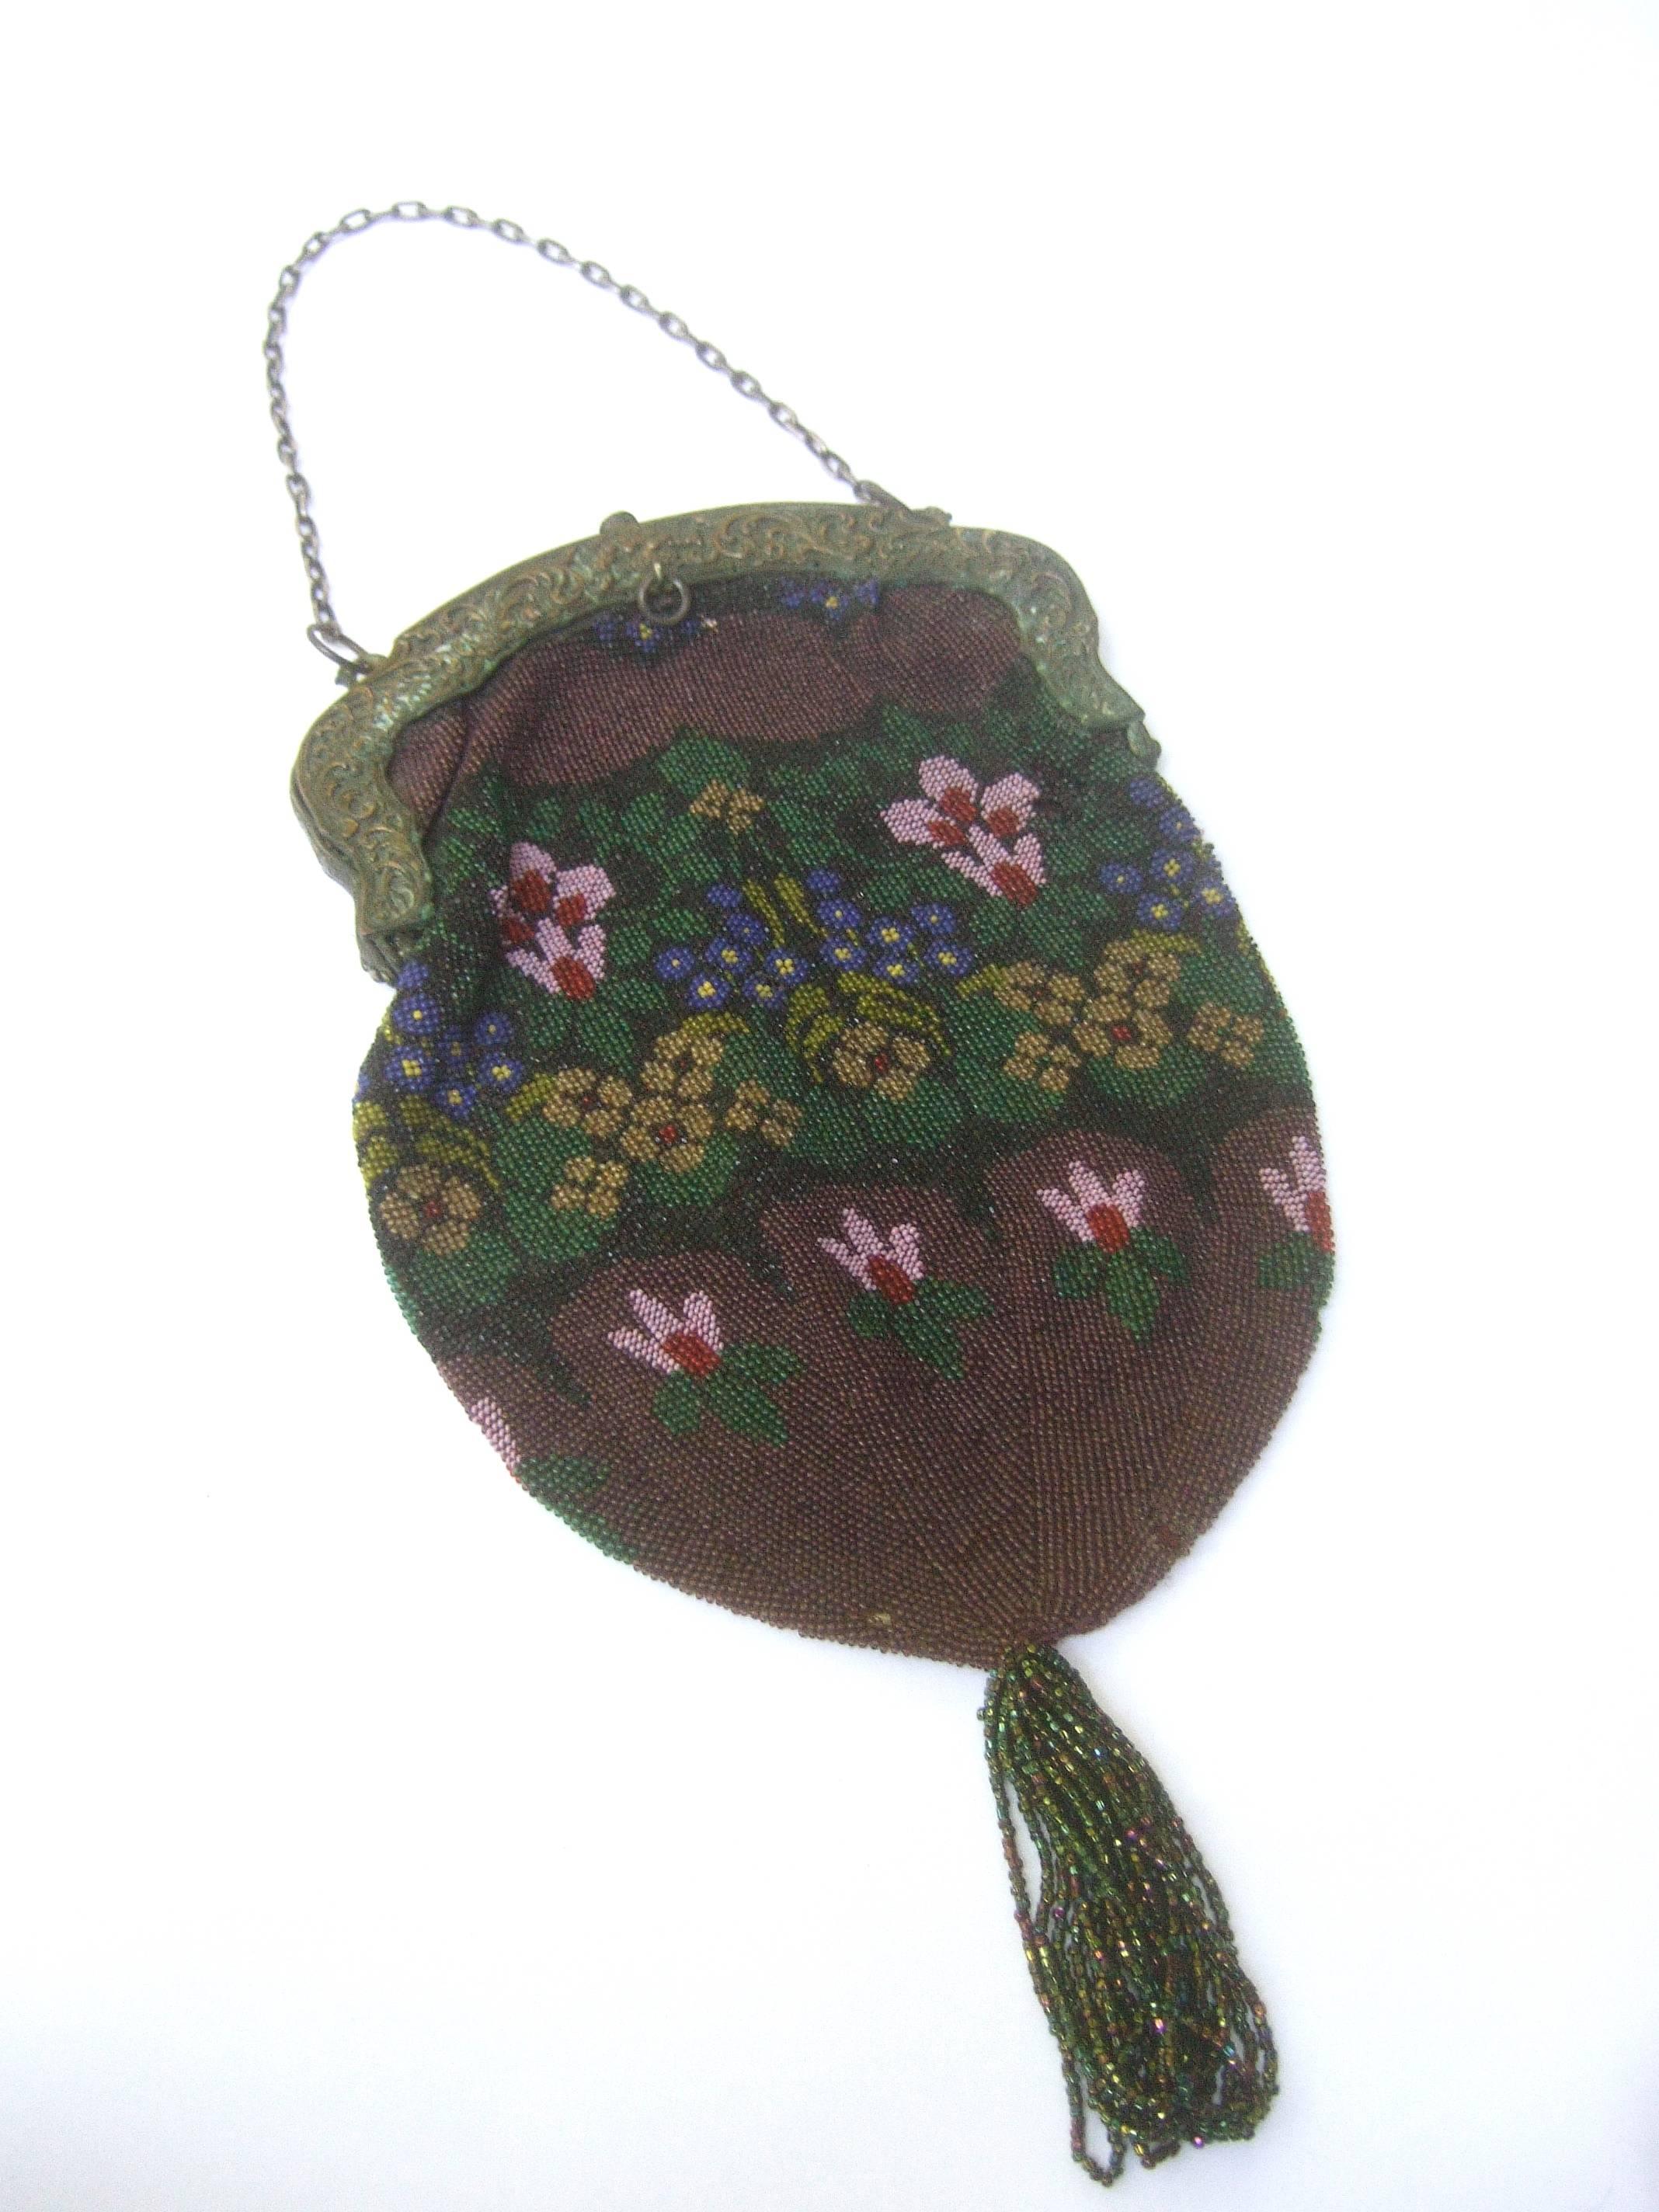 Exquisite Glass Hand Beaded Flower Evening Bag ca 1920s In Fair Condition For Sale In University City, MO